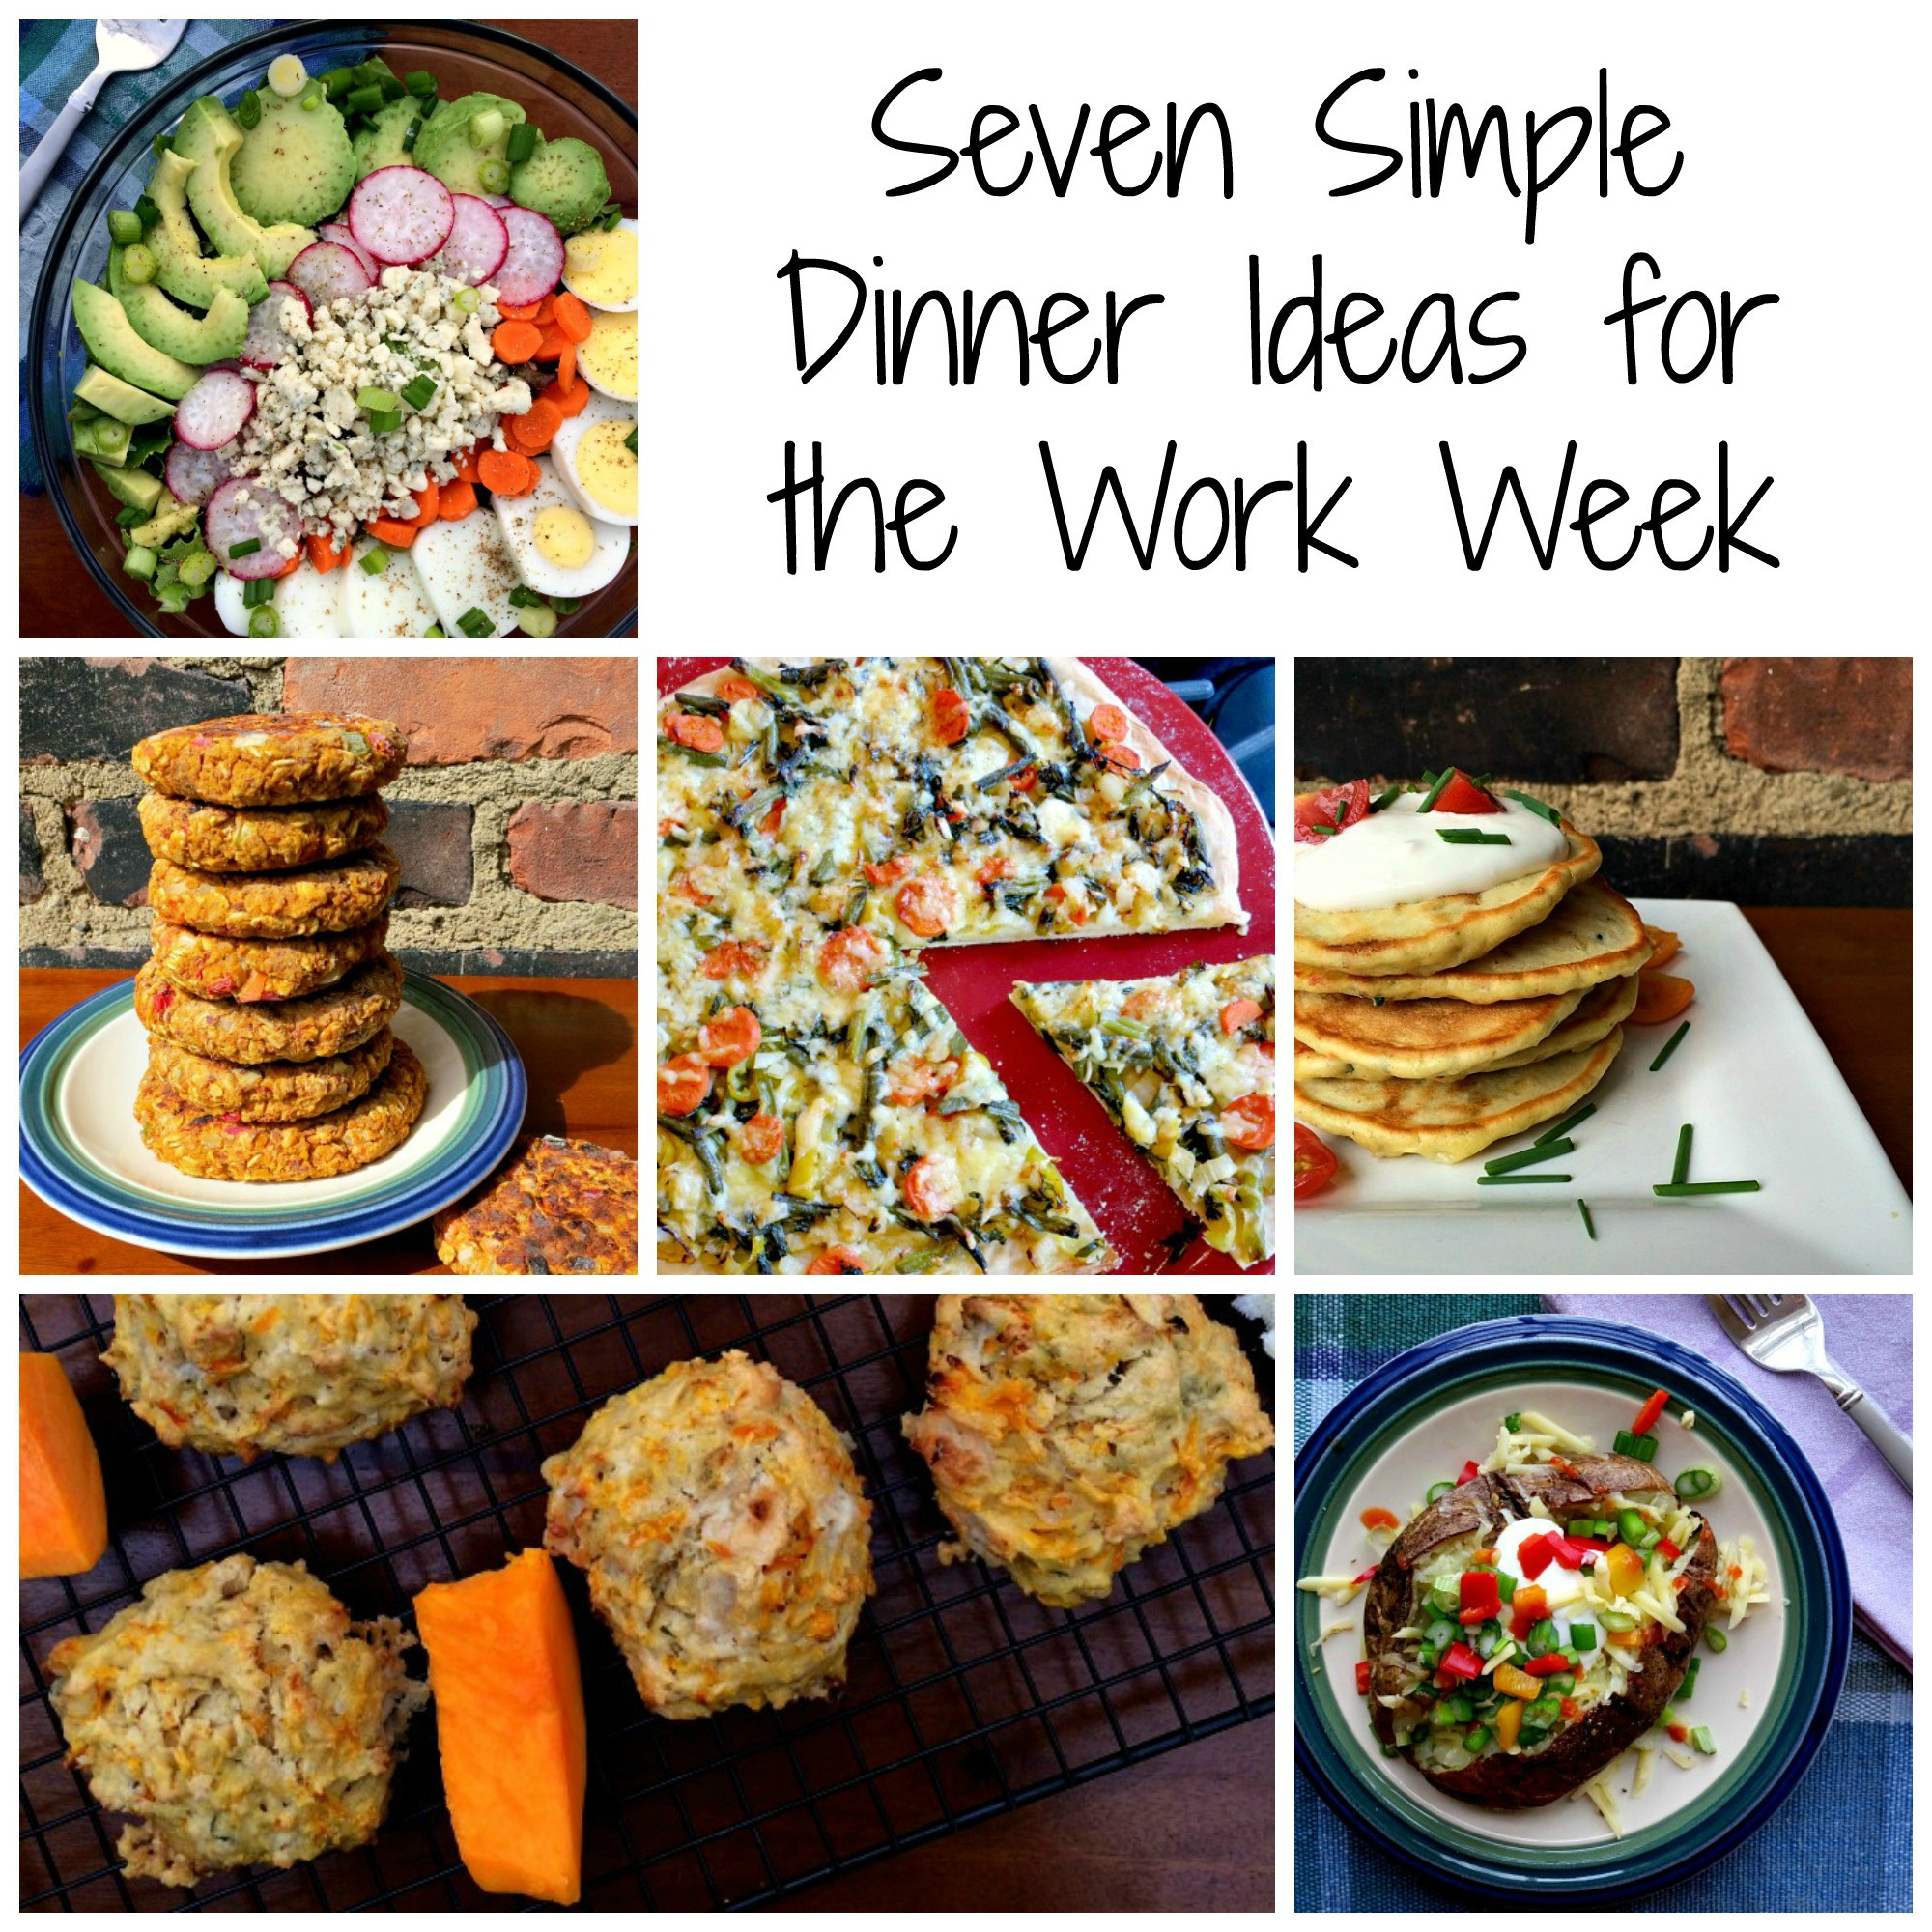 Dinners Ideas For The Week
 Seven Simple Dinner Ideas for the Work Week Clean Eats